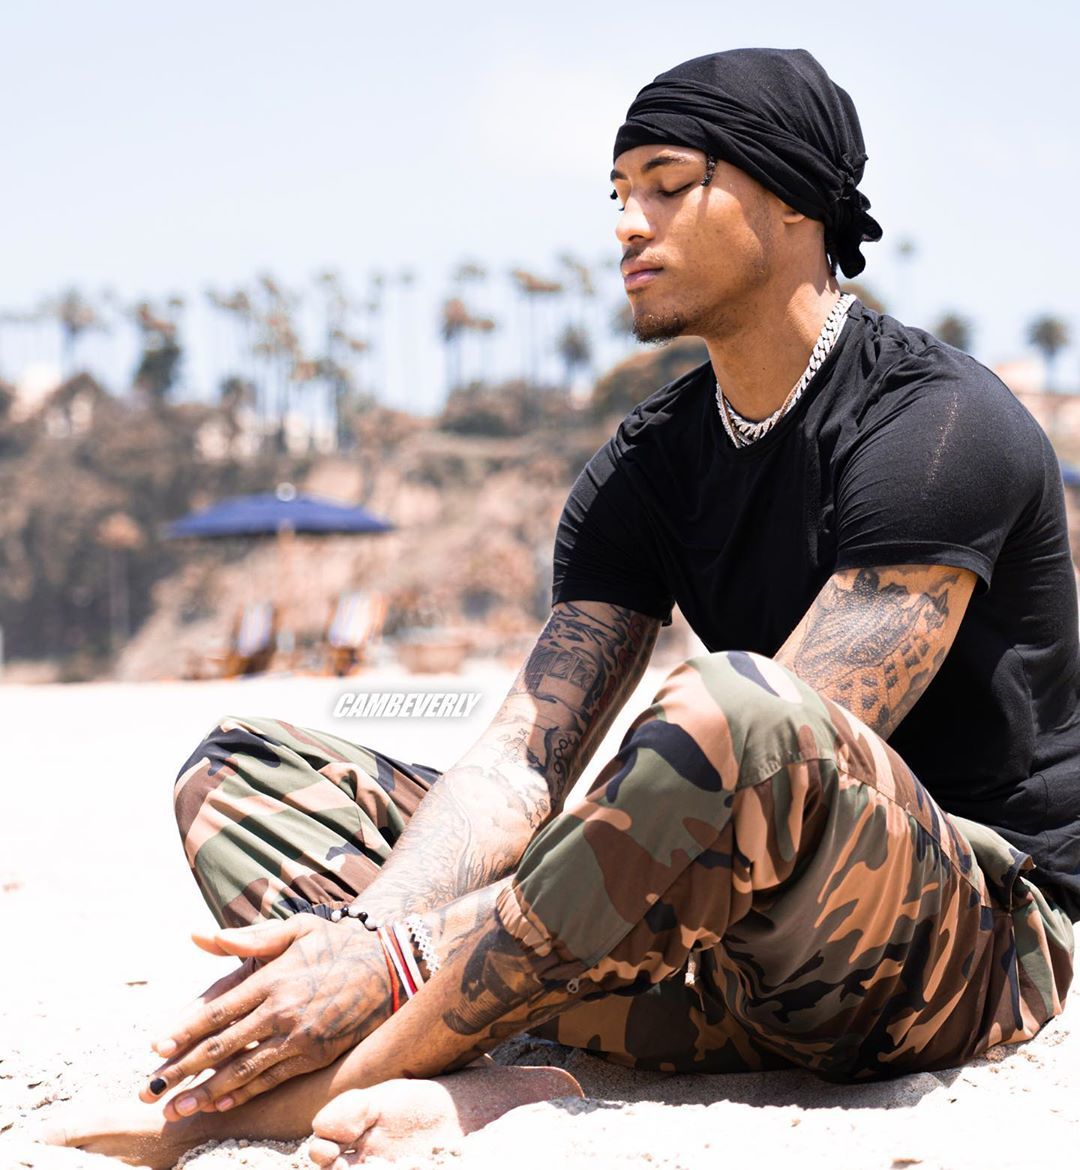 Barefoot Male Celebs of Color — Kelly Oubre Jr.